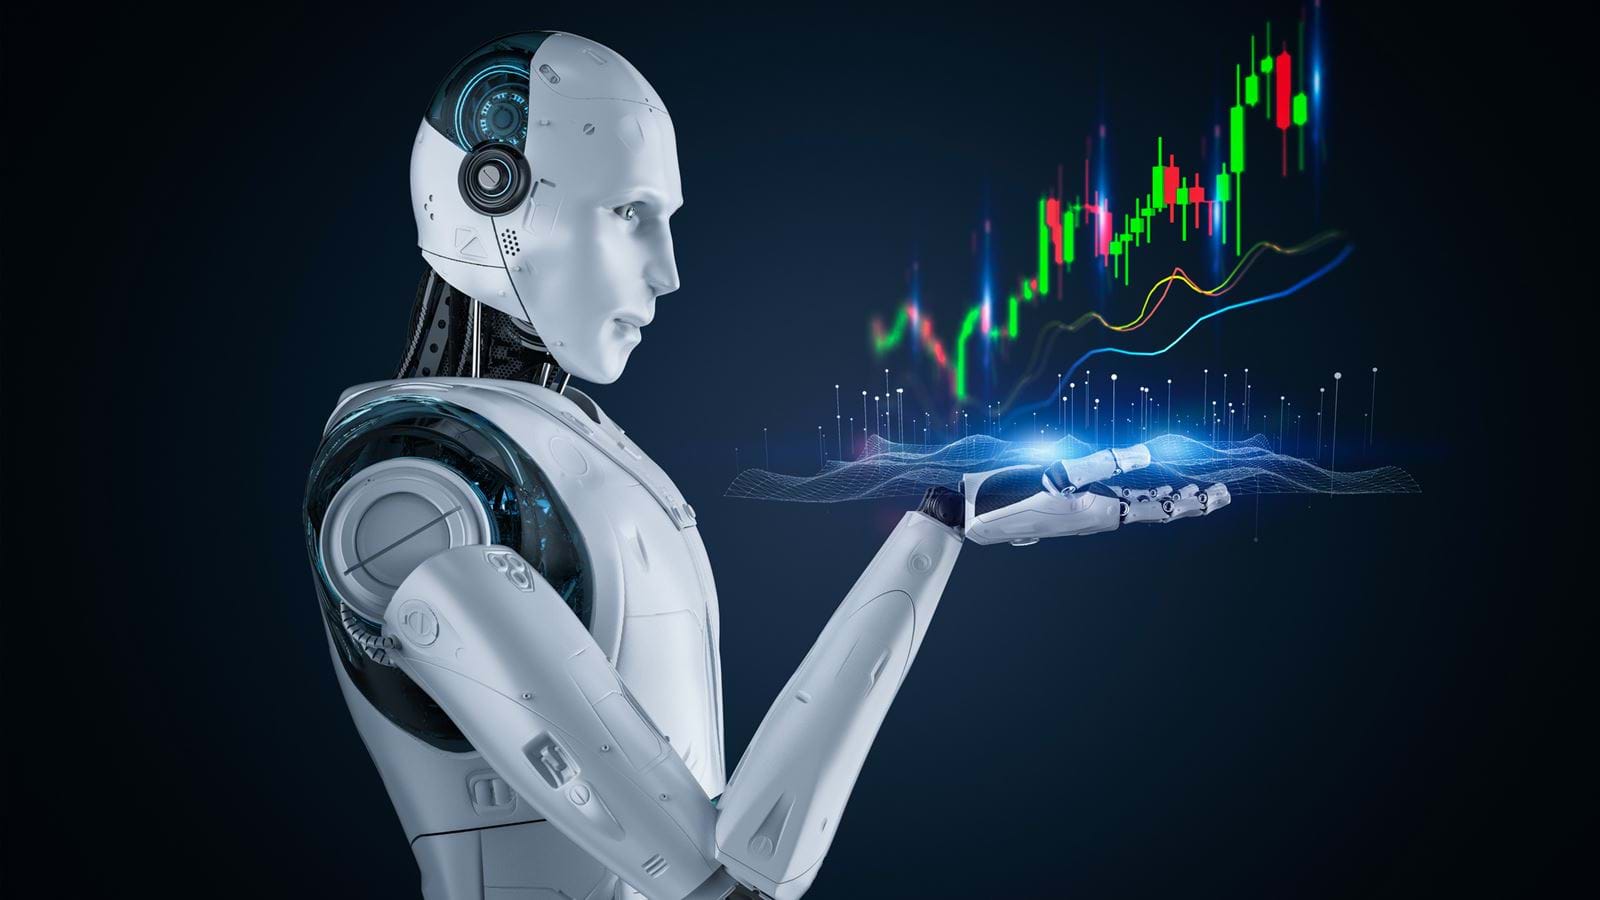 What Are The Pros And Cons Of A Robo Advisor